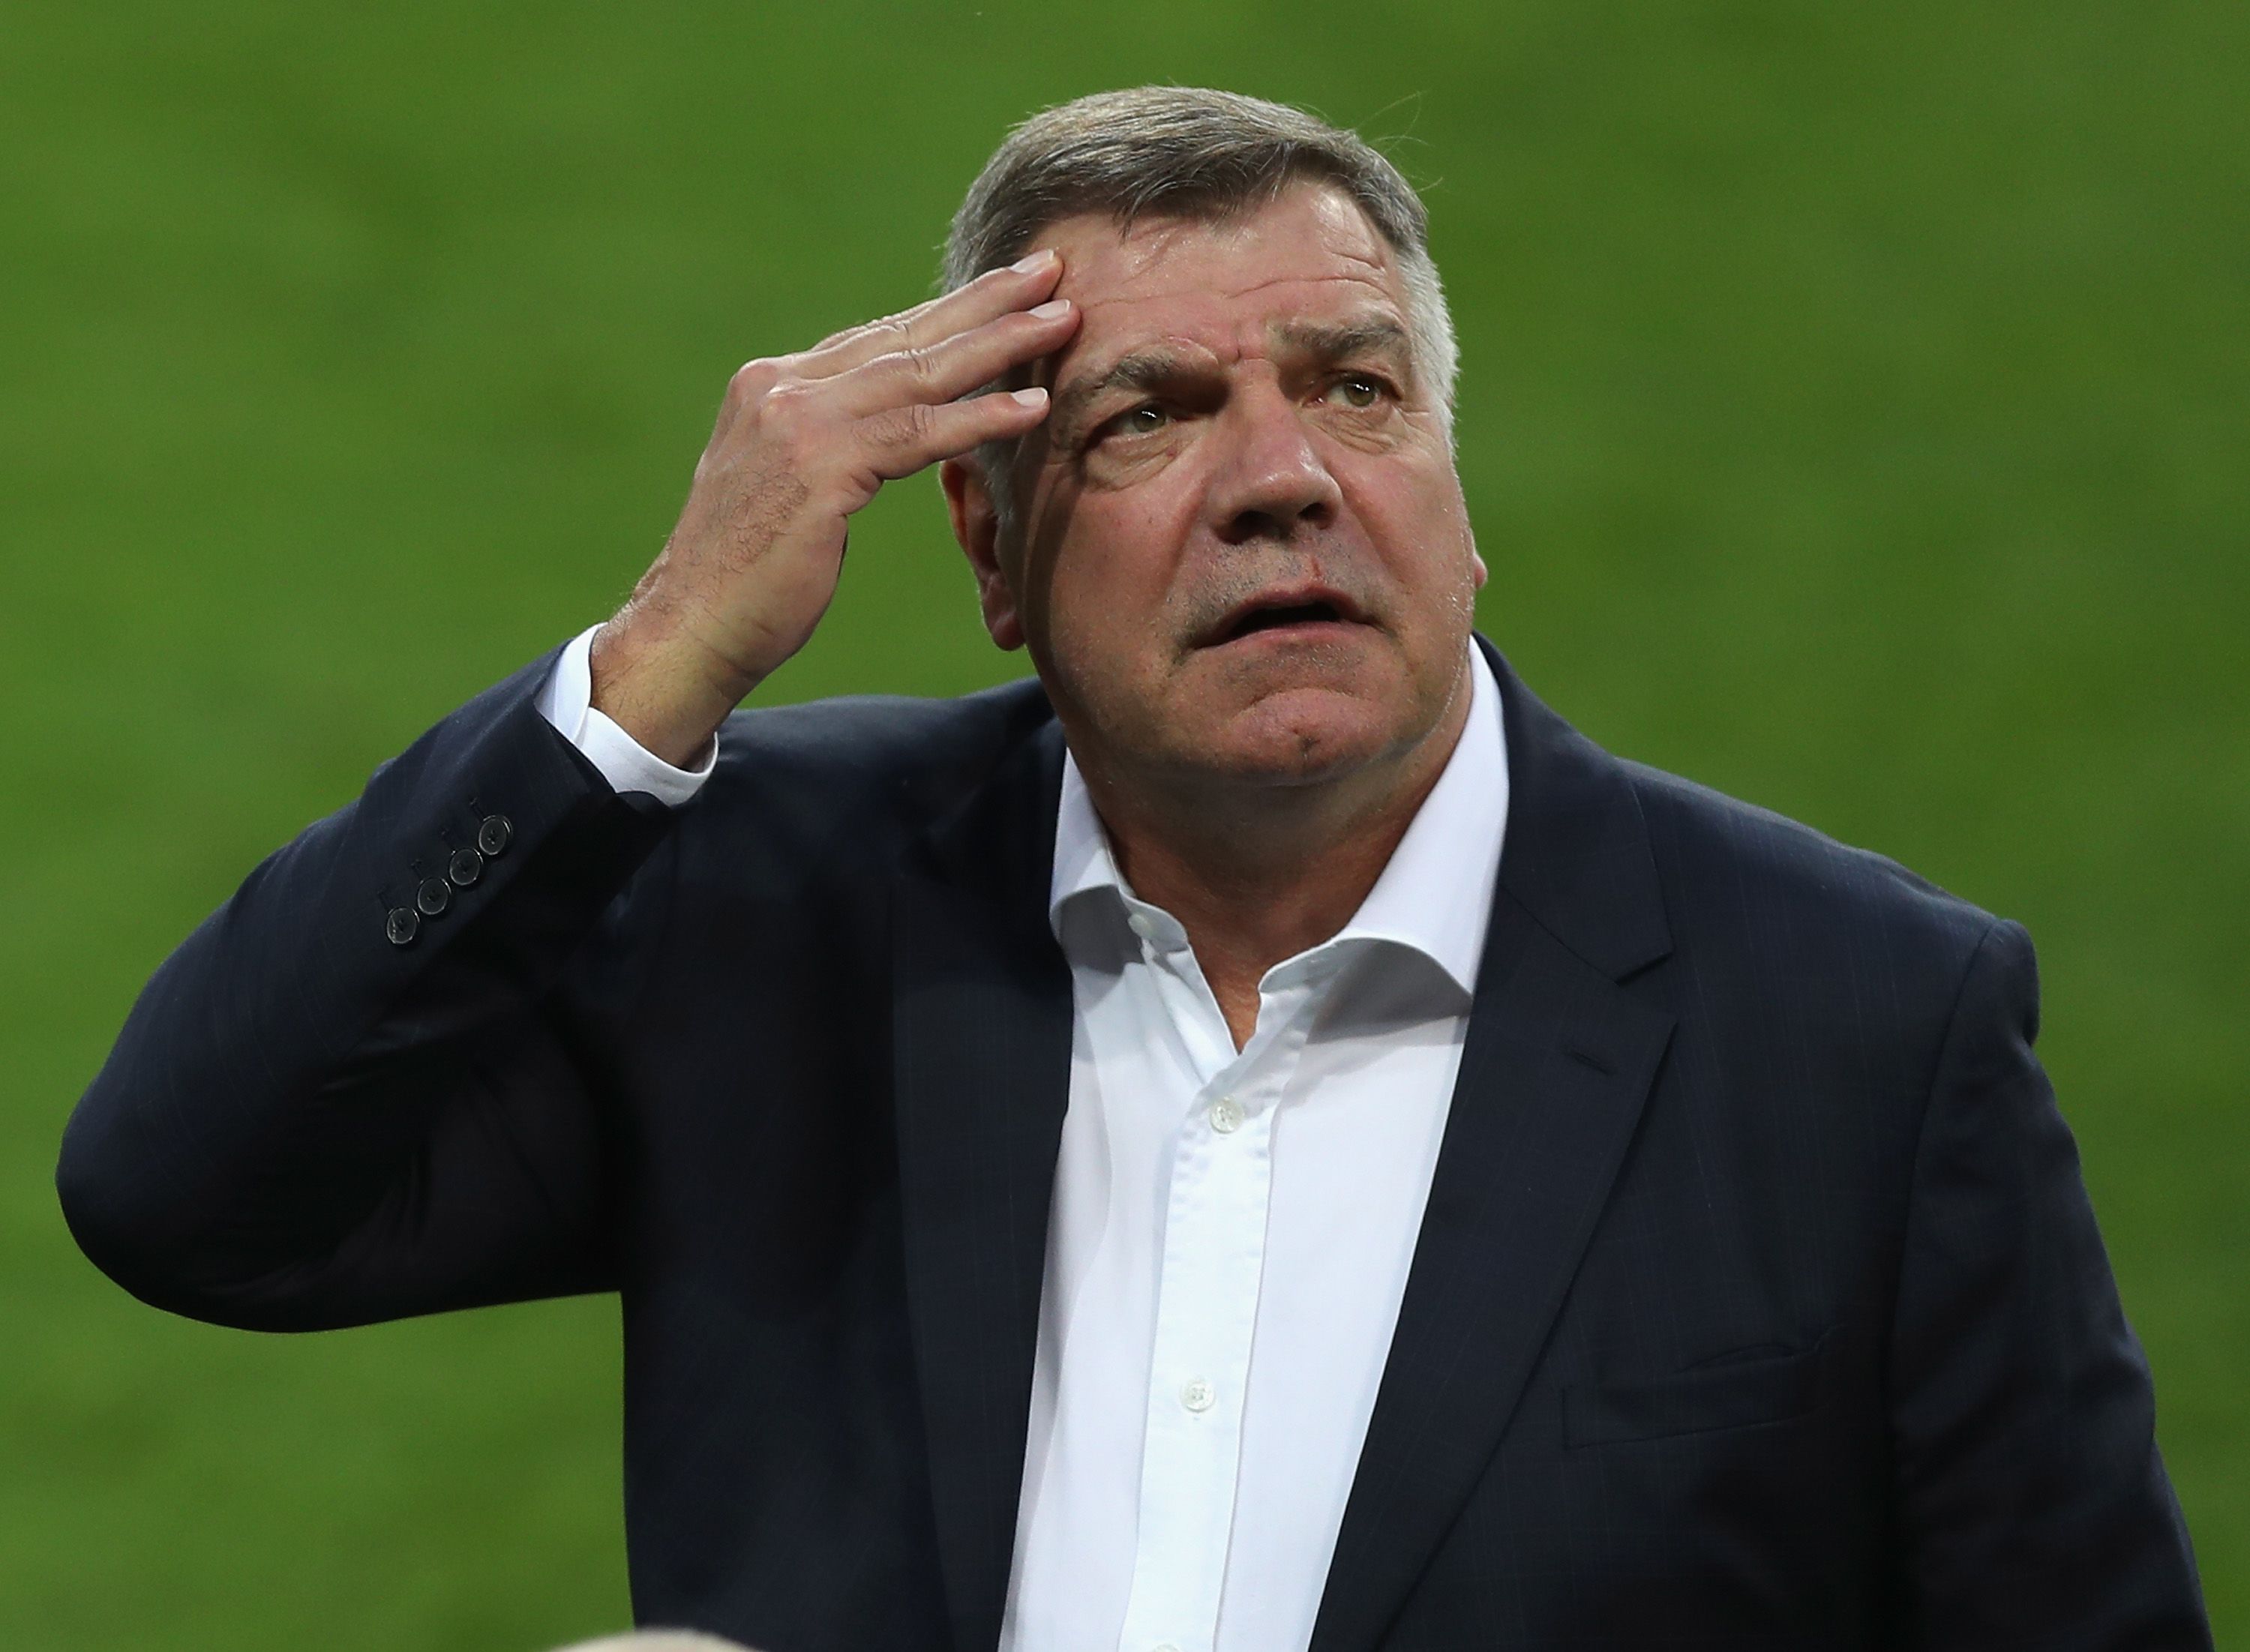 Allardyce appointed England manager: Big Sam's best quotes - TNT